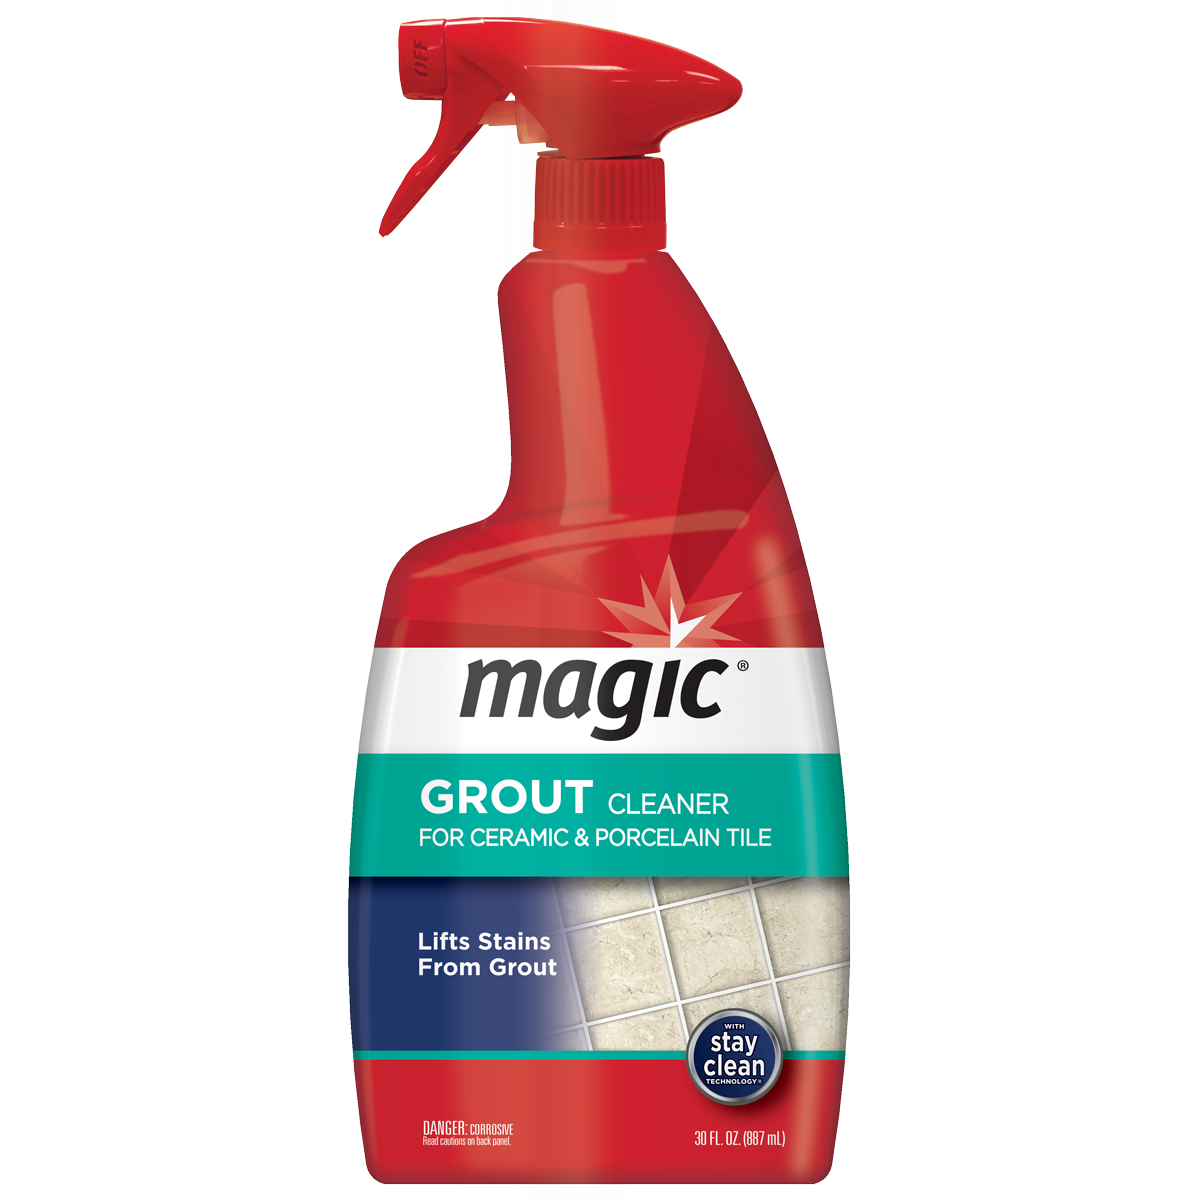 https://www.whatsinproducts.com//files/brands_images/1609728577_08018168ImageMagicGroutCleanerforCeramicPorcelainTilePumpSpray.png